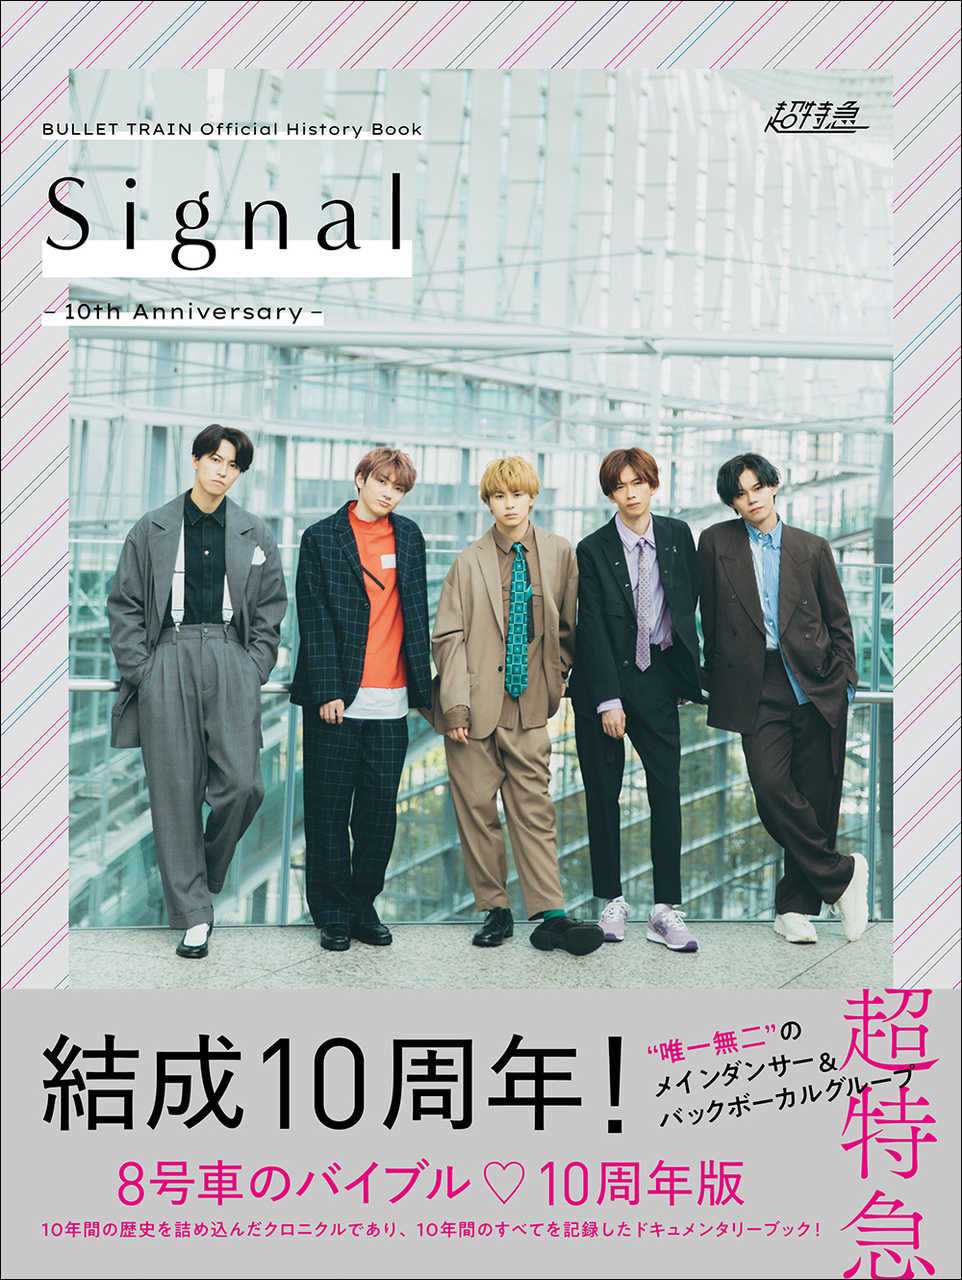 『BULLET TRAIN Official History Book Signal -10th Anniversary-』帯あり